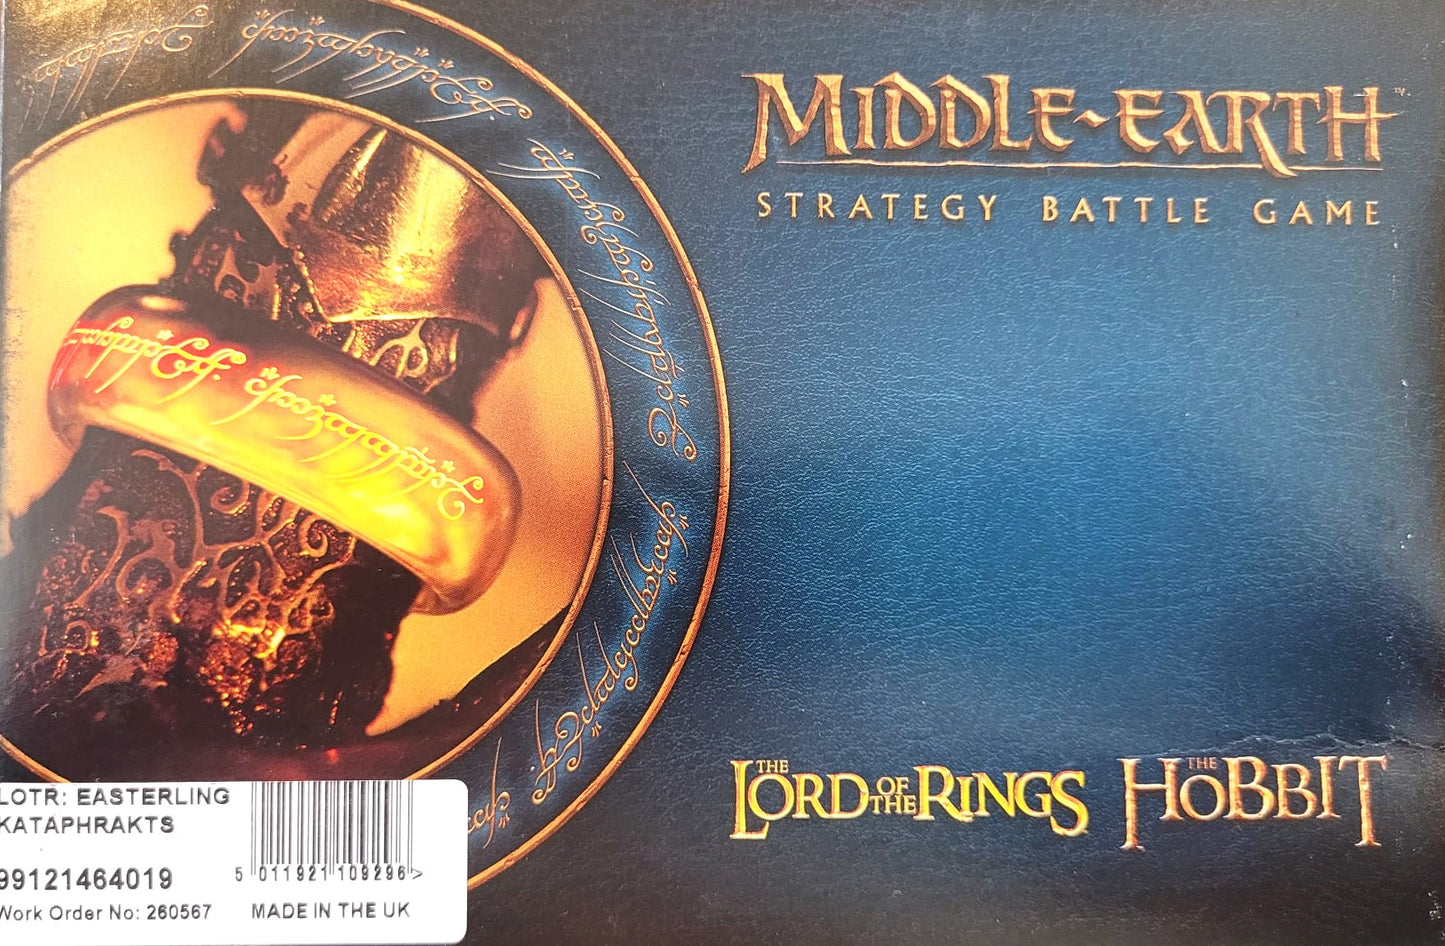 Easterling Kataphrakts Lord of The Rings Middle-Earth NIB! WBGames